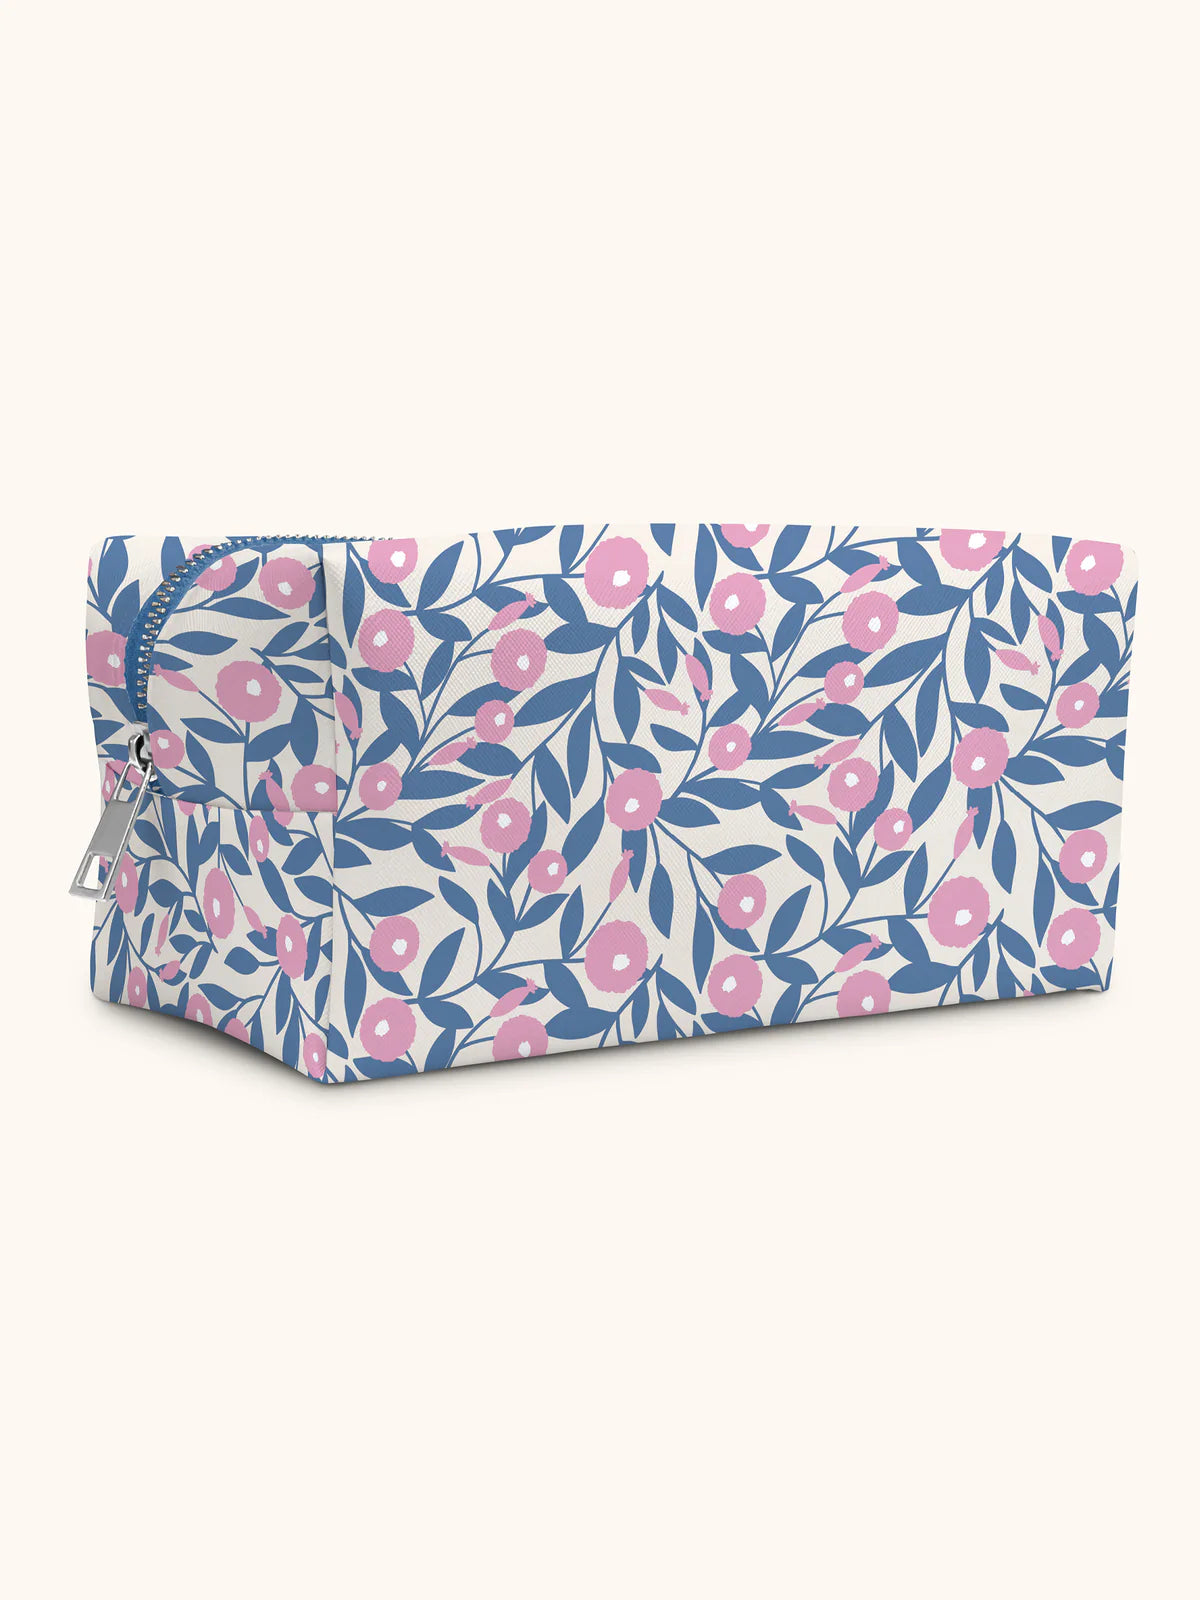 BLUSHING DAHLIAS LOAF COSMETIC POUCH